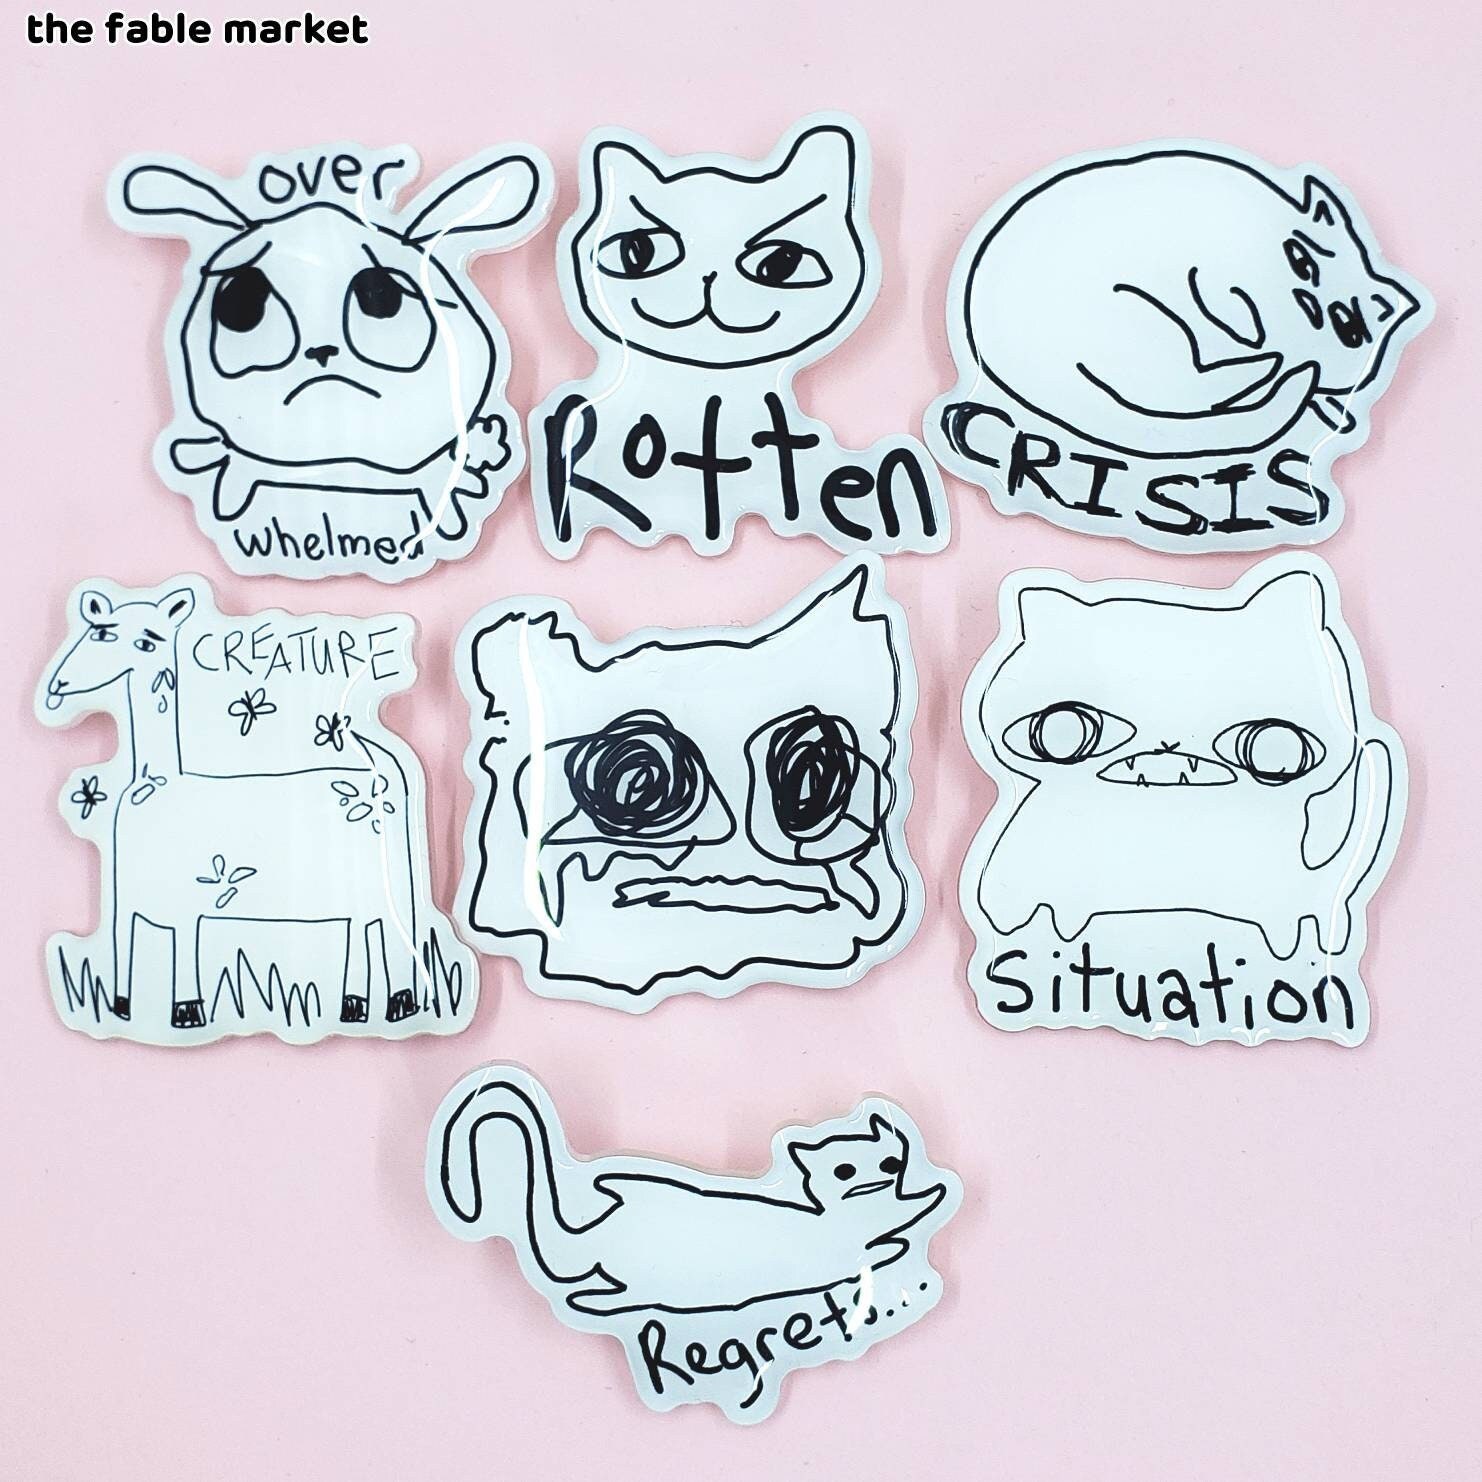 Cute Cat Soft Button Pins Sad and Cool Meme Pack Printed Icon